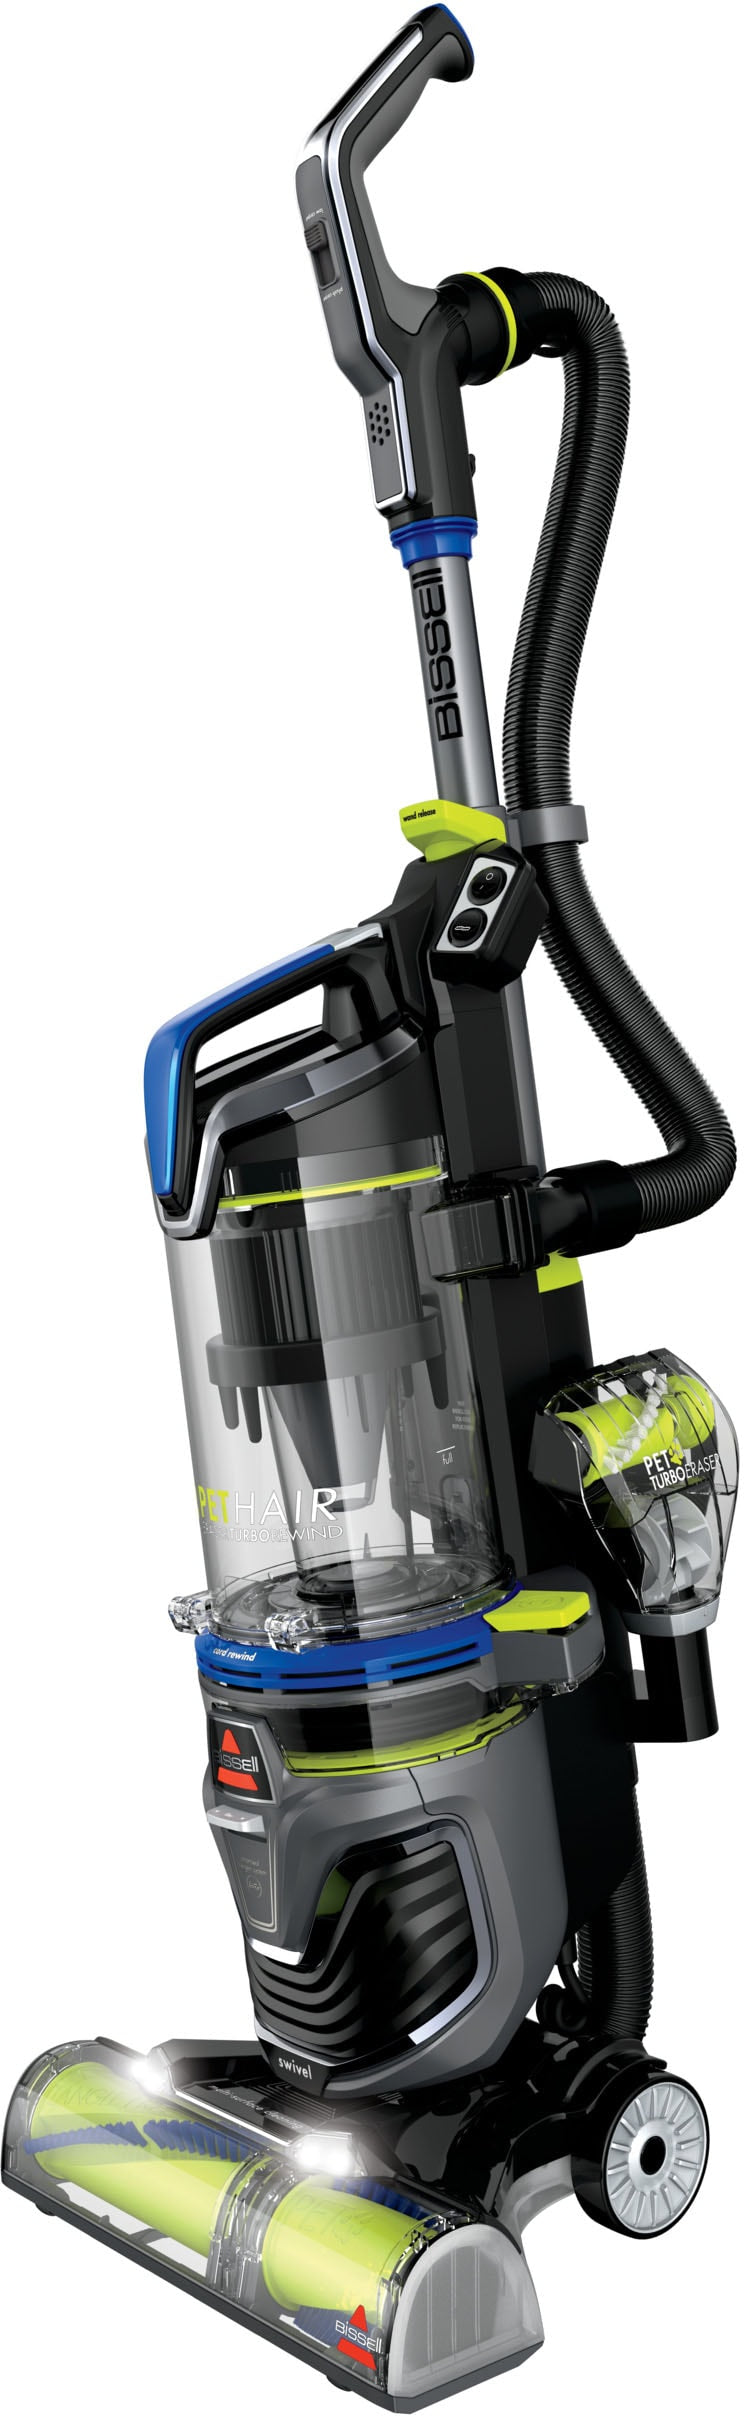 BISSELL Pet Hair Eraser Turbo Rewind Upright Vacuum - Cobalt Blue and Electric Green_1